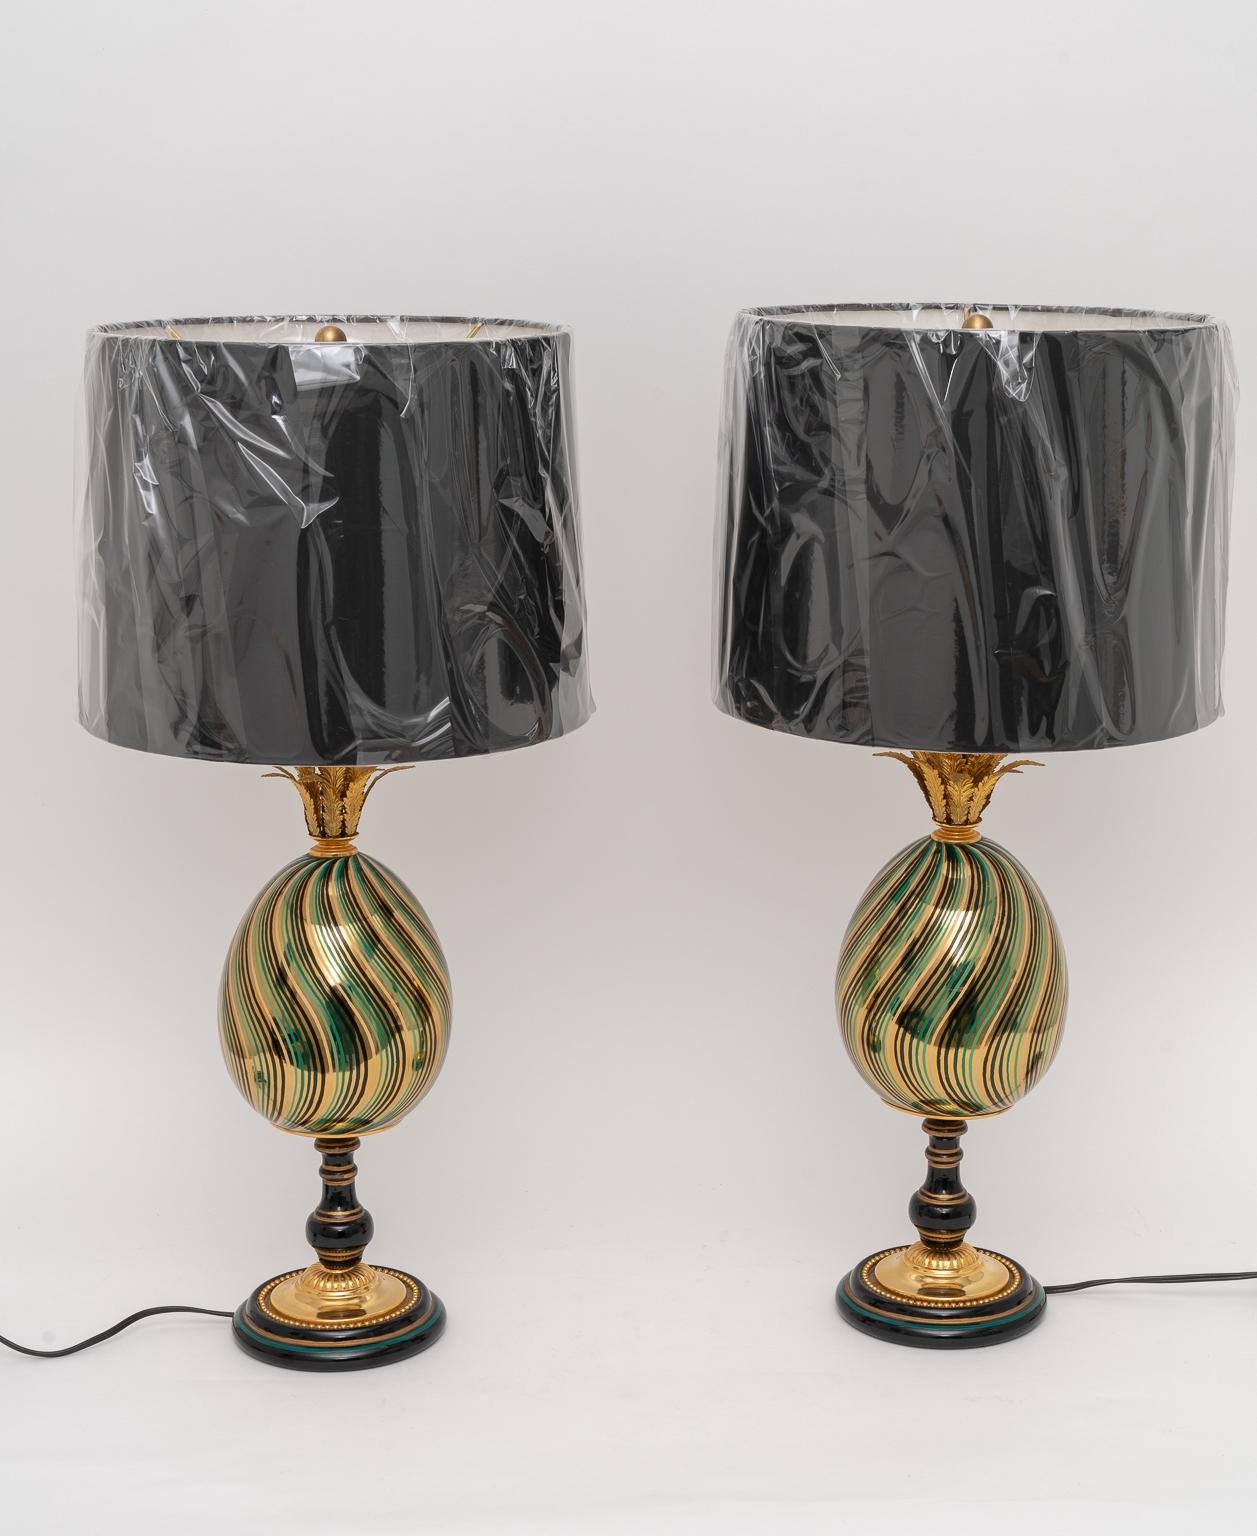 This stylish set of table lamps are attributed to Maison Jansen and are fabricated in porcelain with and enameled colors in gilt gold, black and green, which complement the gilt brass palmetto fronds and mountings.

Note: Custom black paper shade